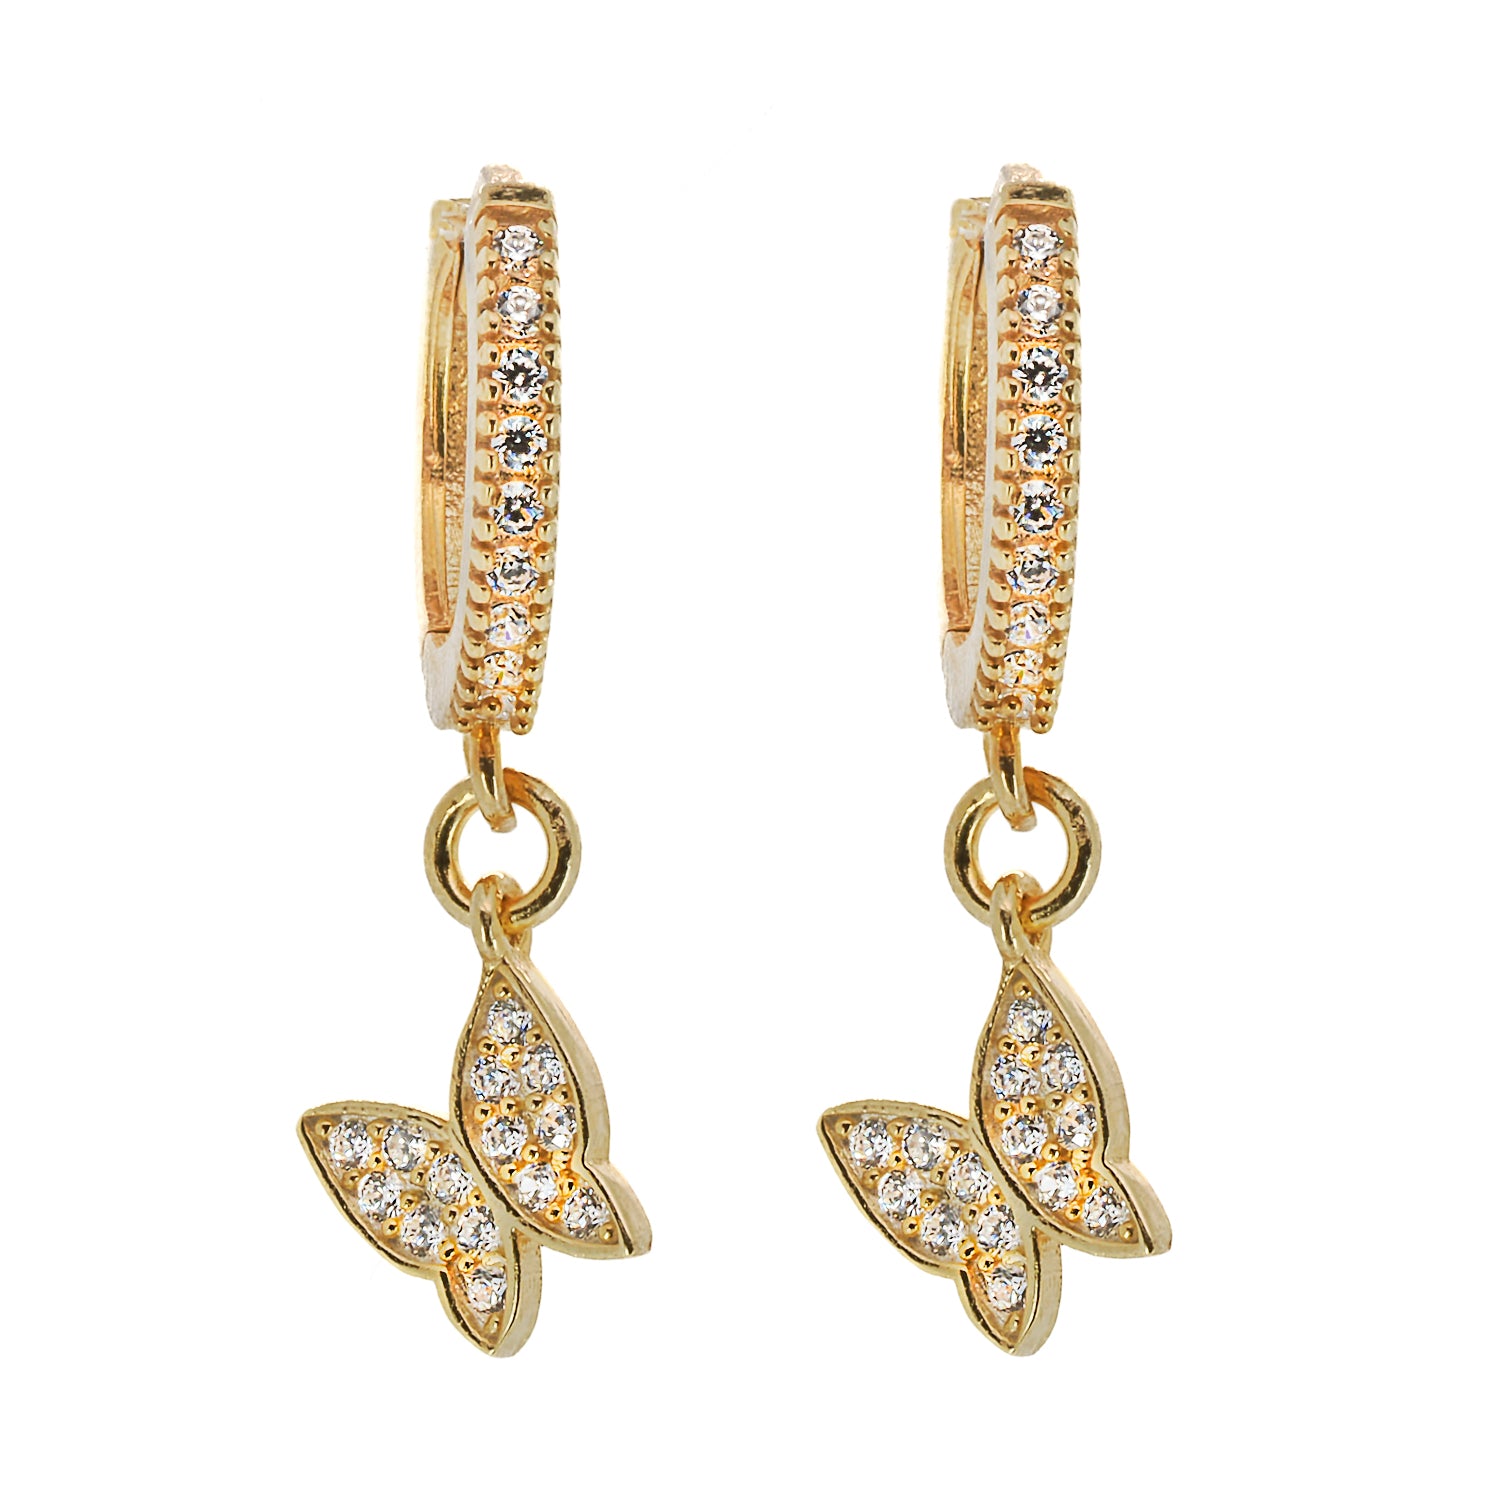 Gold Sparkly Butterfly Earrings with CZ diamonds, a symbol of elegance and grace